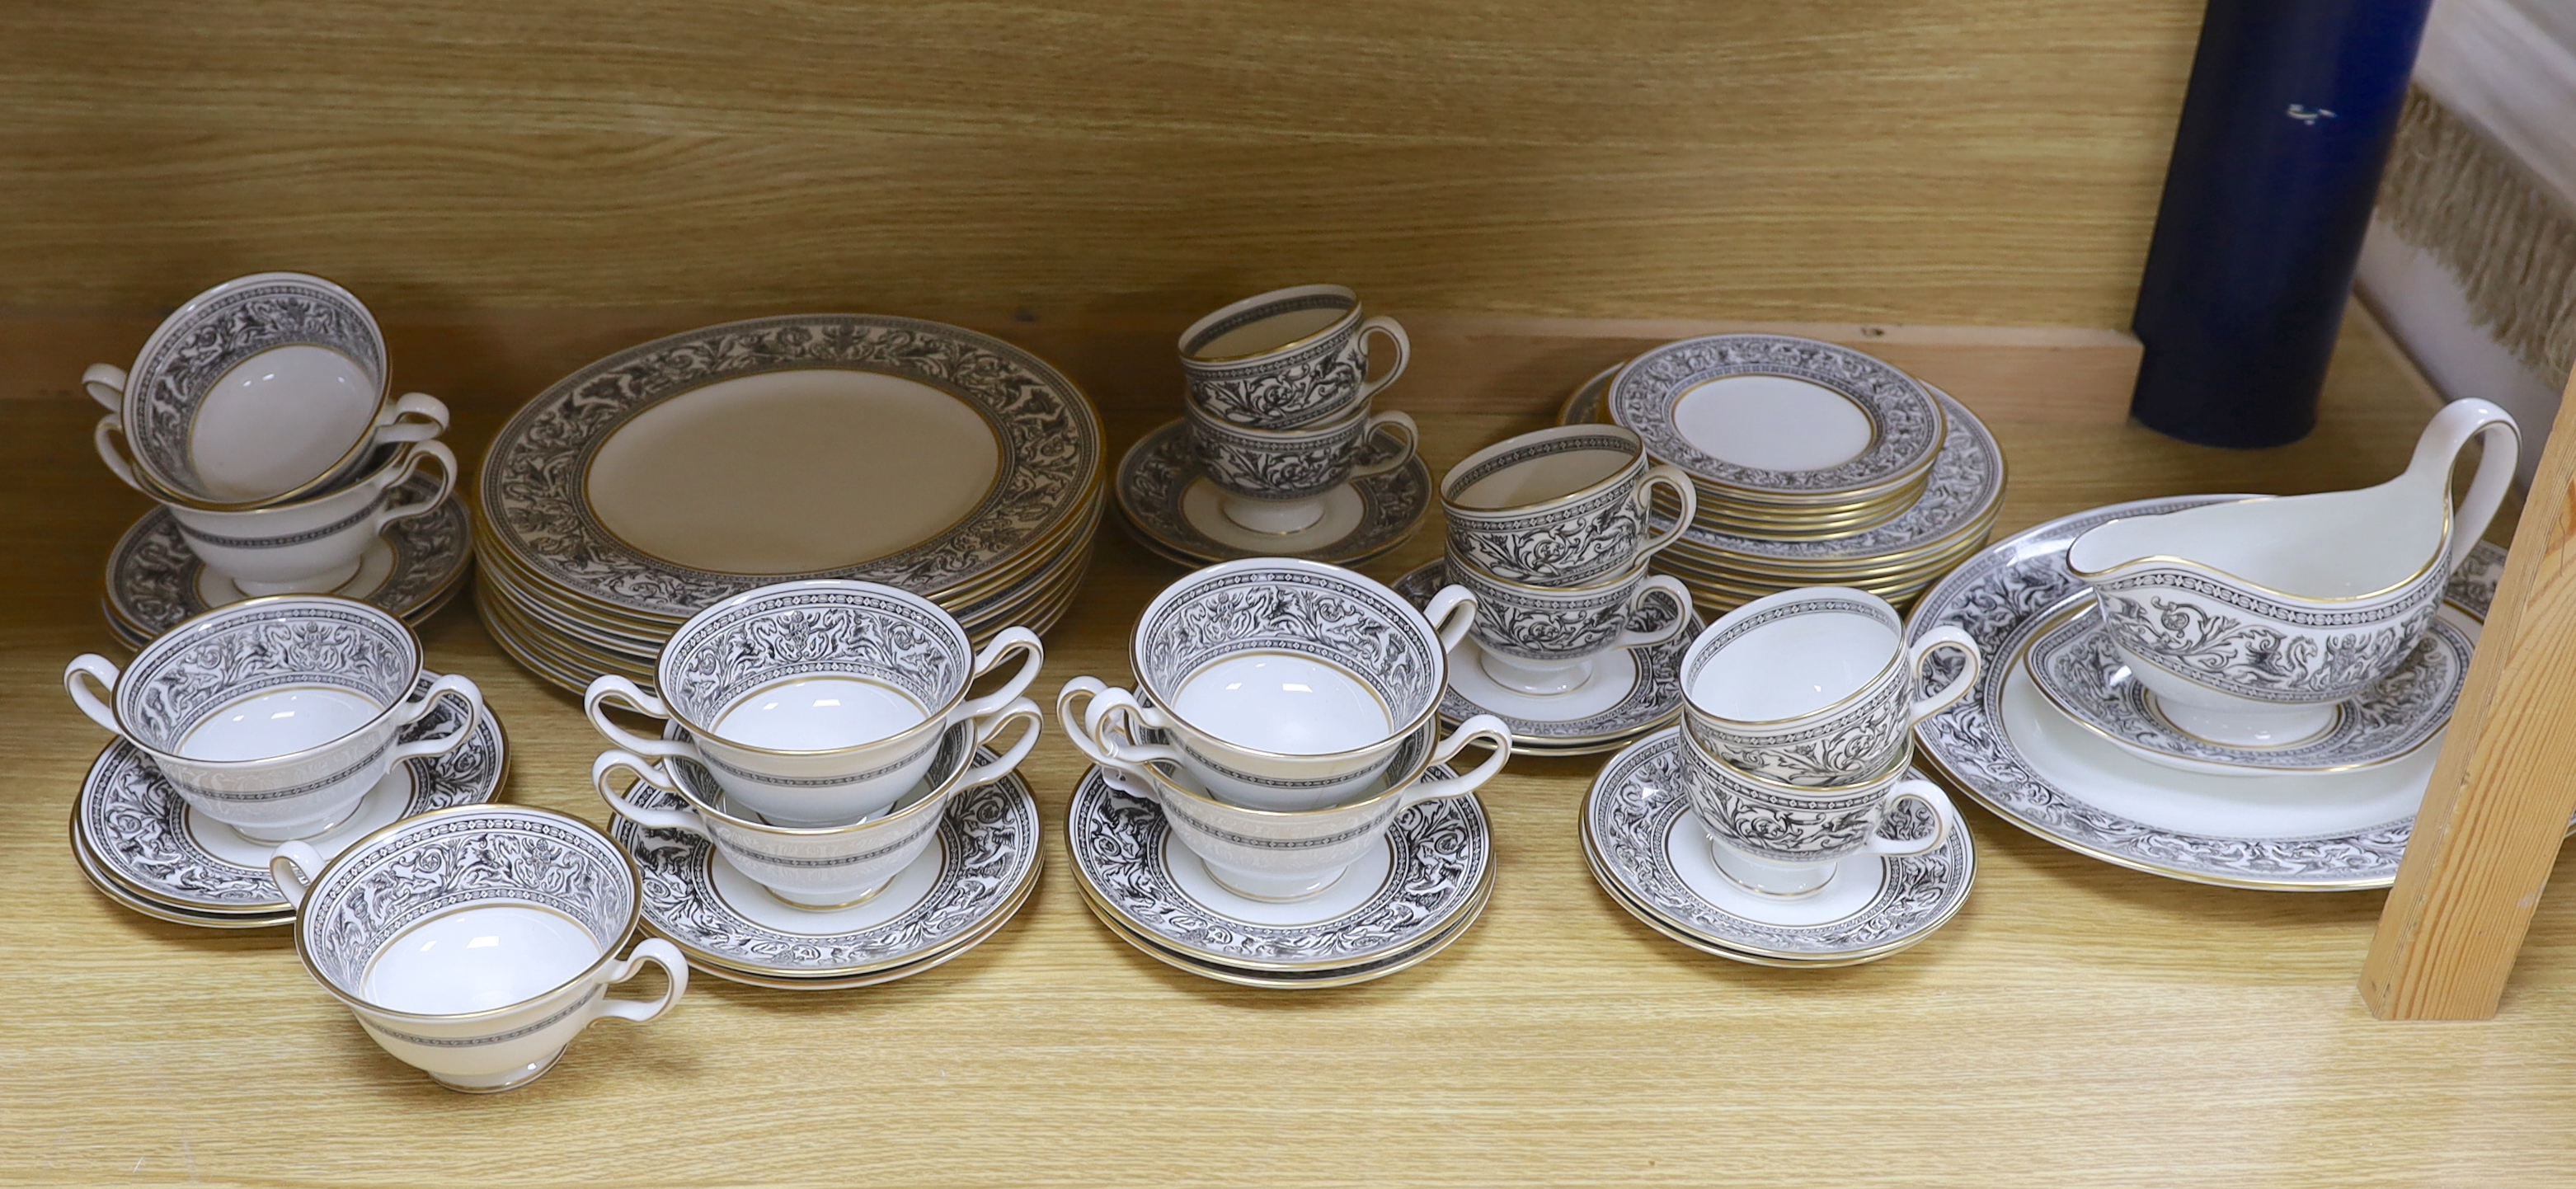 A Wedgwood Florentine part dinner set including twin handled cups, oval platter and dinner plates, largest 34cm wide